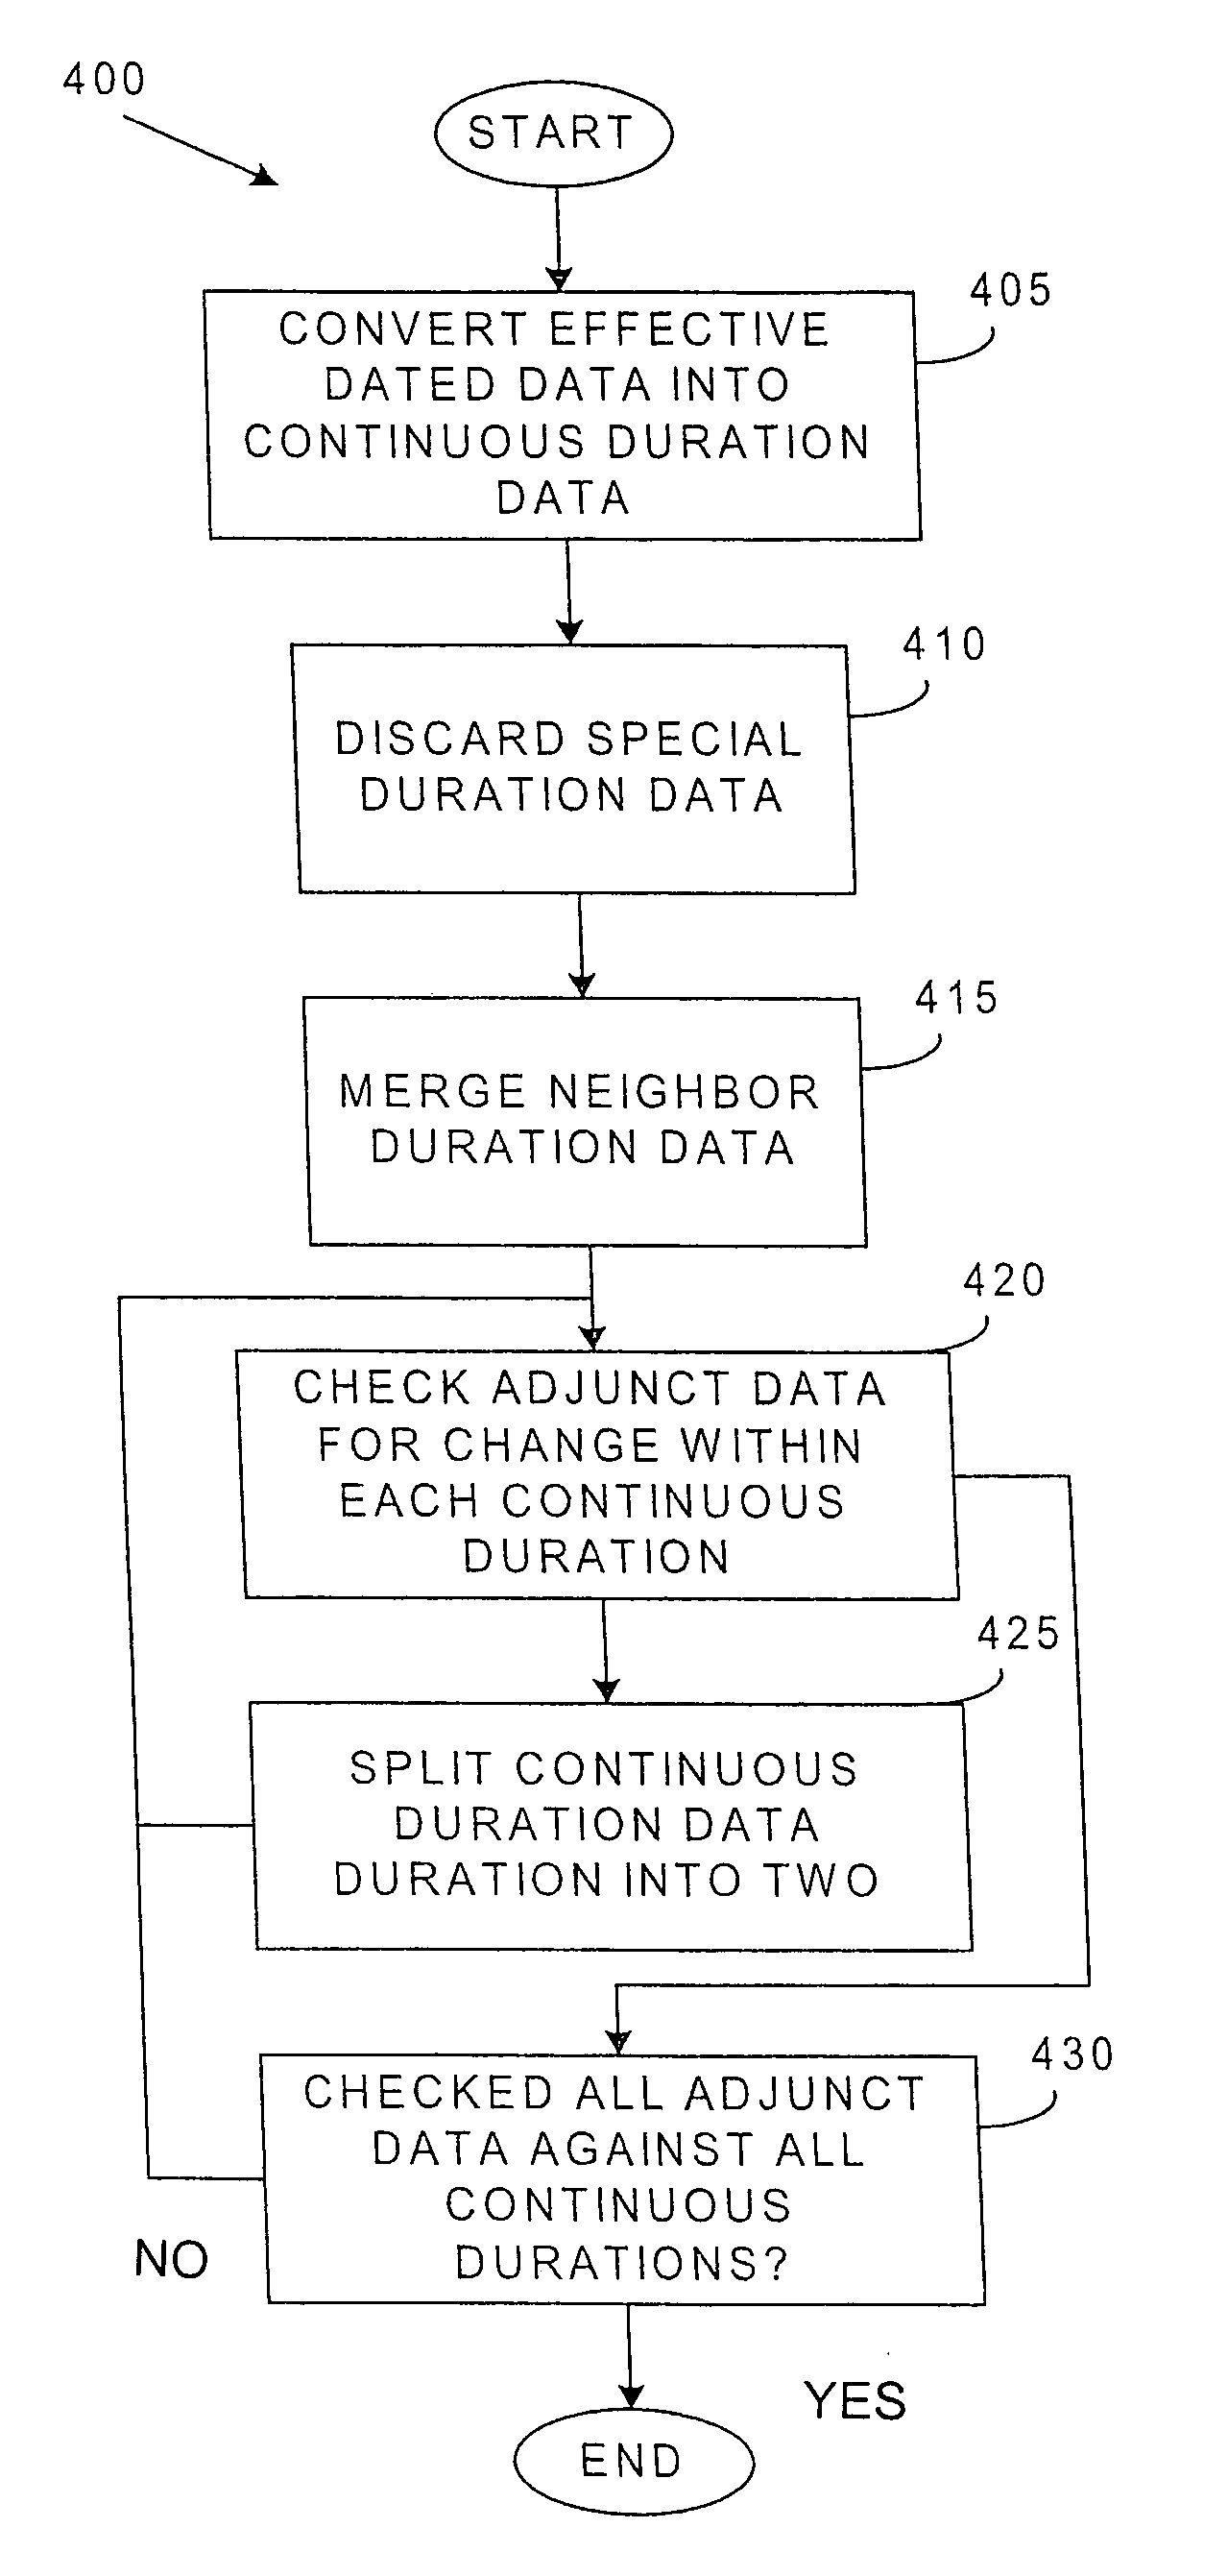 Method for merging information from effective dated base tables